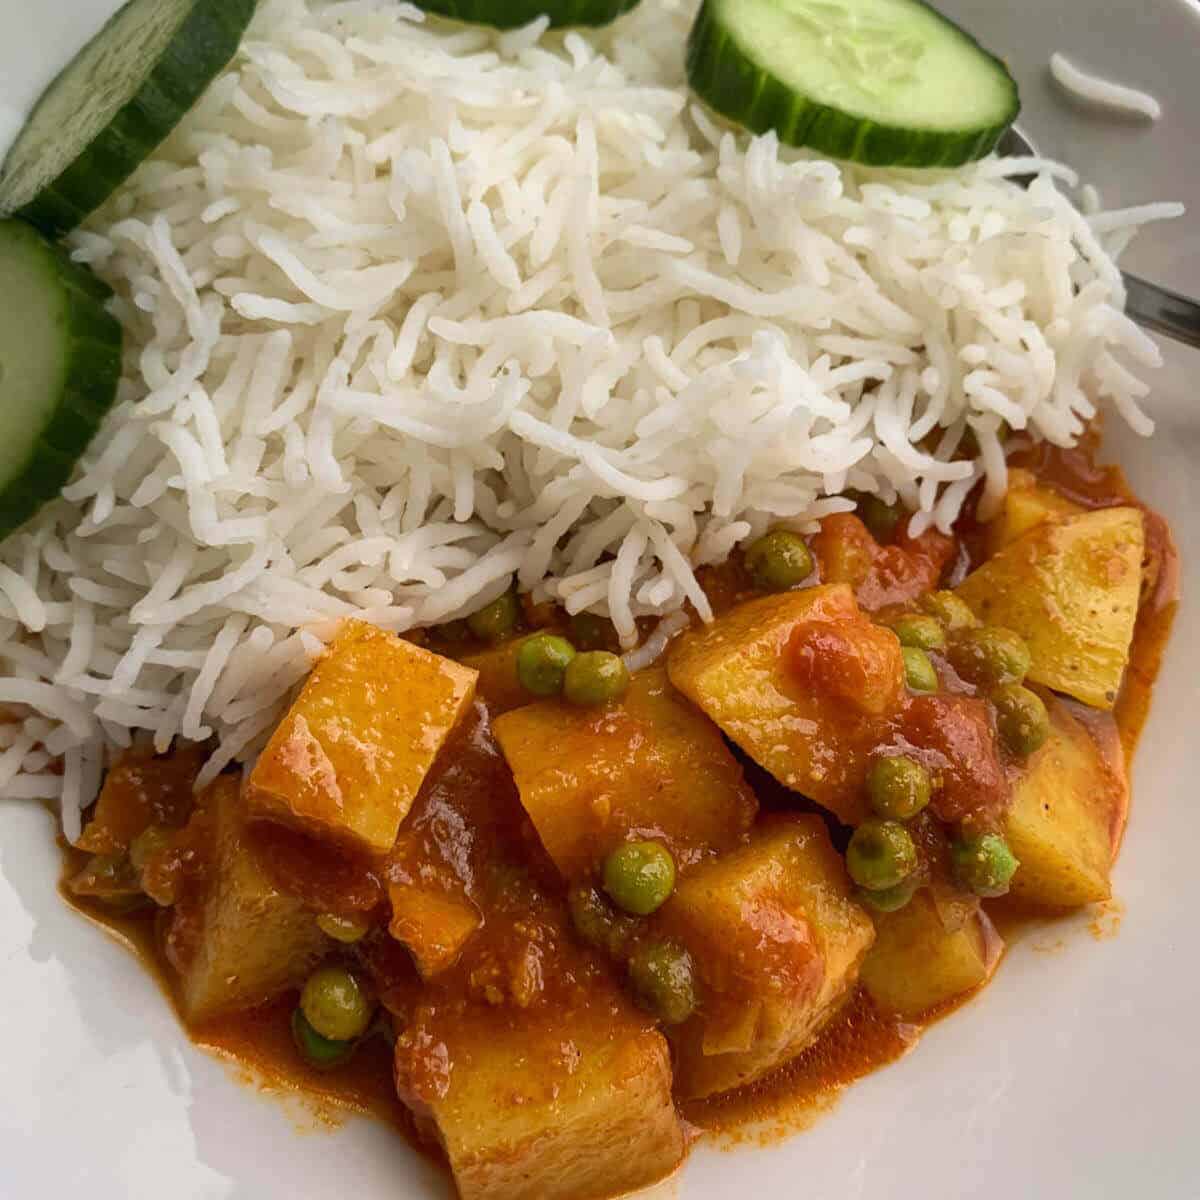 Alu matar curry served with white basmati and some cucumbers rounds on the side.